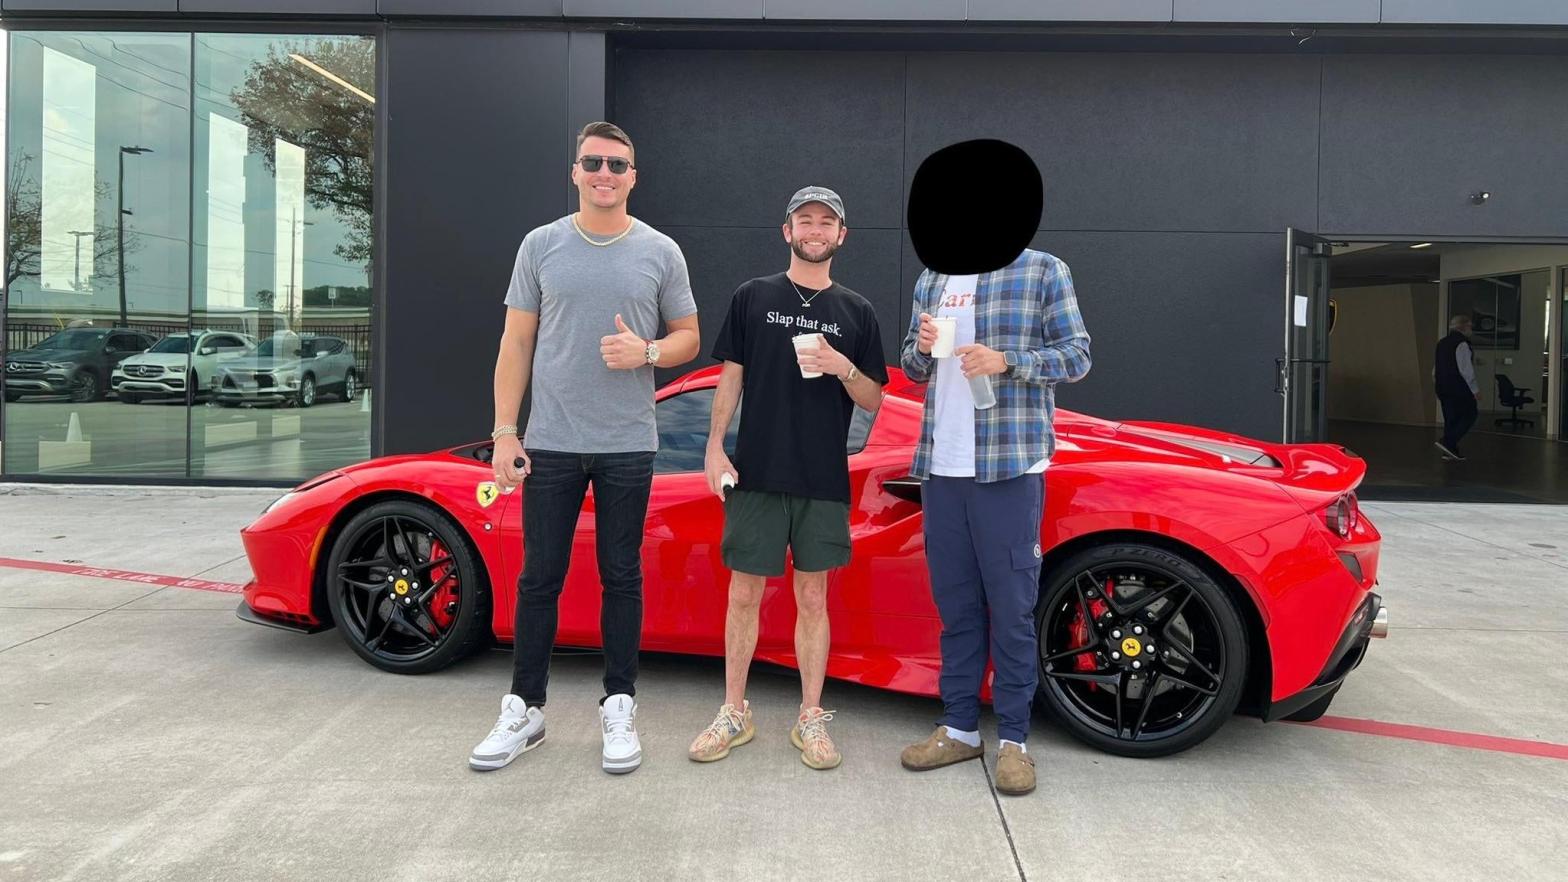 Edward Constantinescu standing alongside Daniel Knight and a third, unknown individual back in 2021. This image was used in charges filed against the pair along with five other financial influencers in what the SEC alleged was a large-scale pump and dump scheme. (Photo: Zack Morris/Twitter)